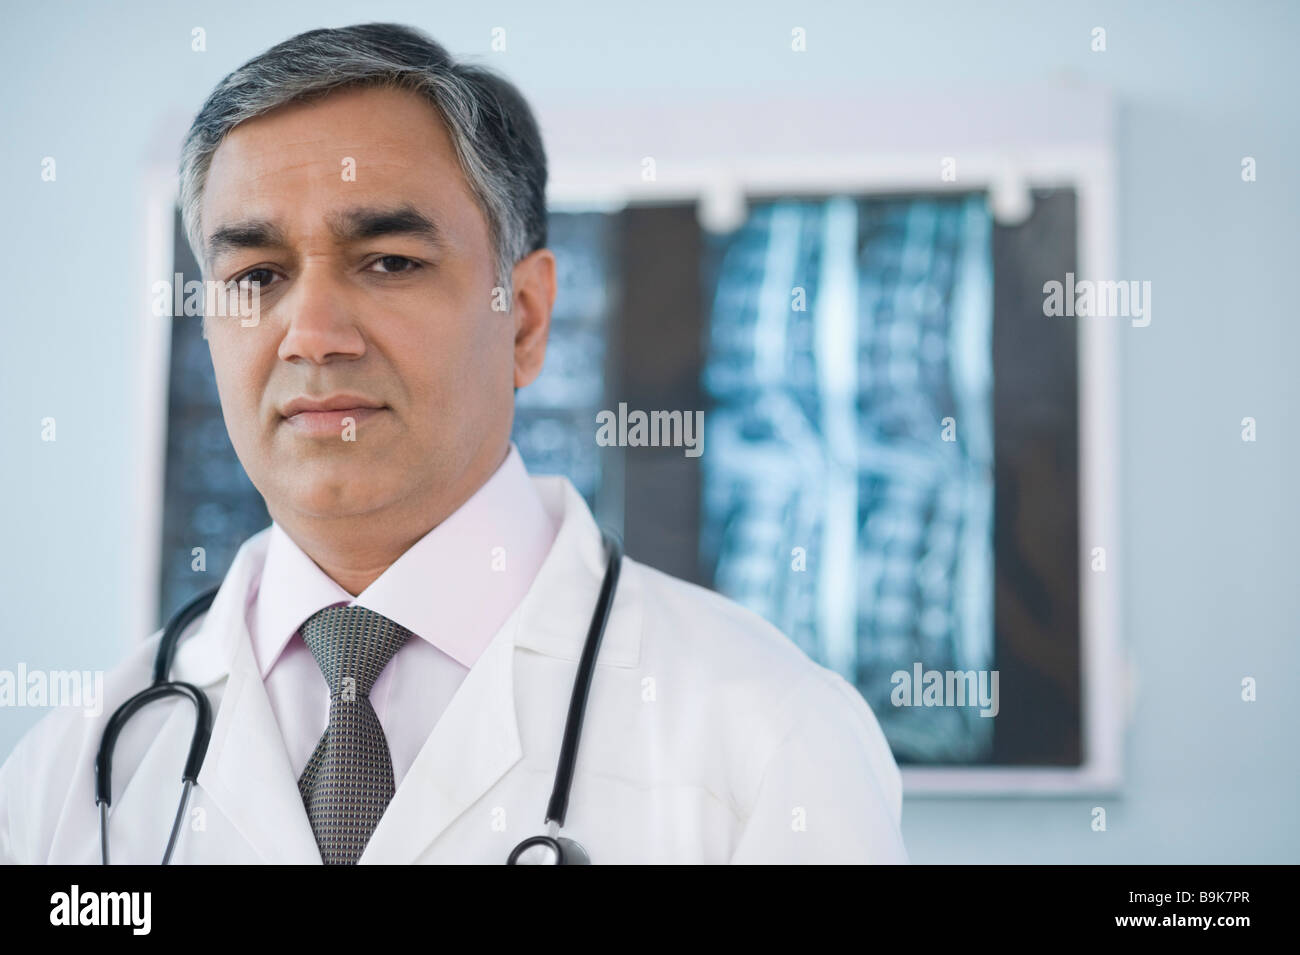 Portrait of a doctor in a hospital Stock Photo